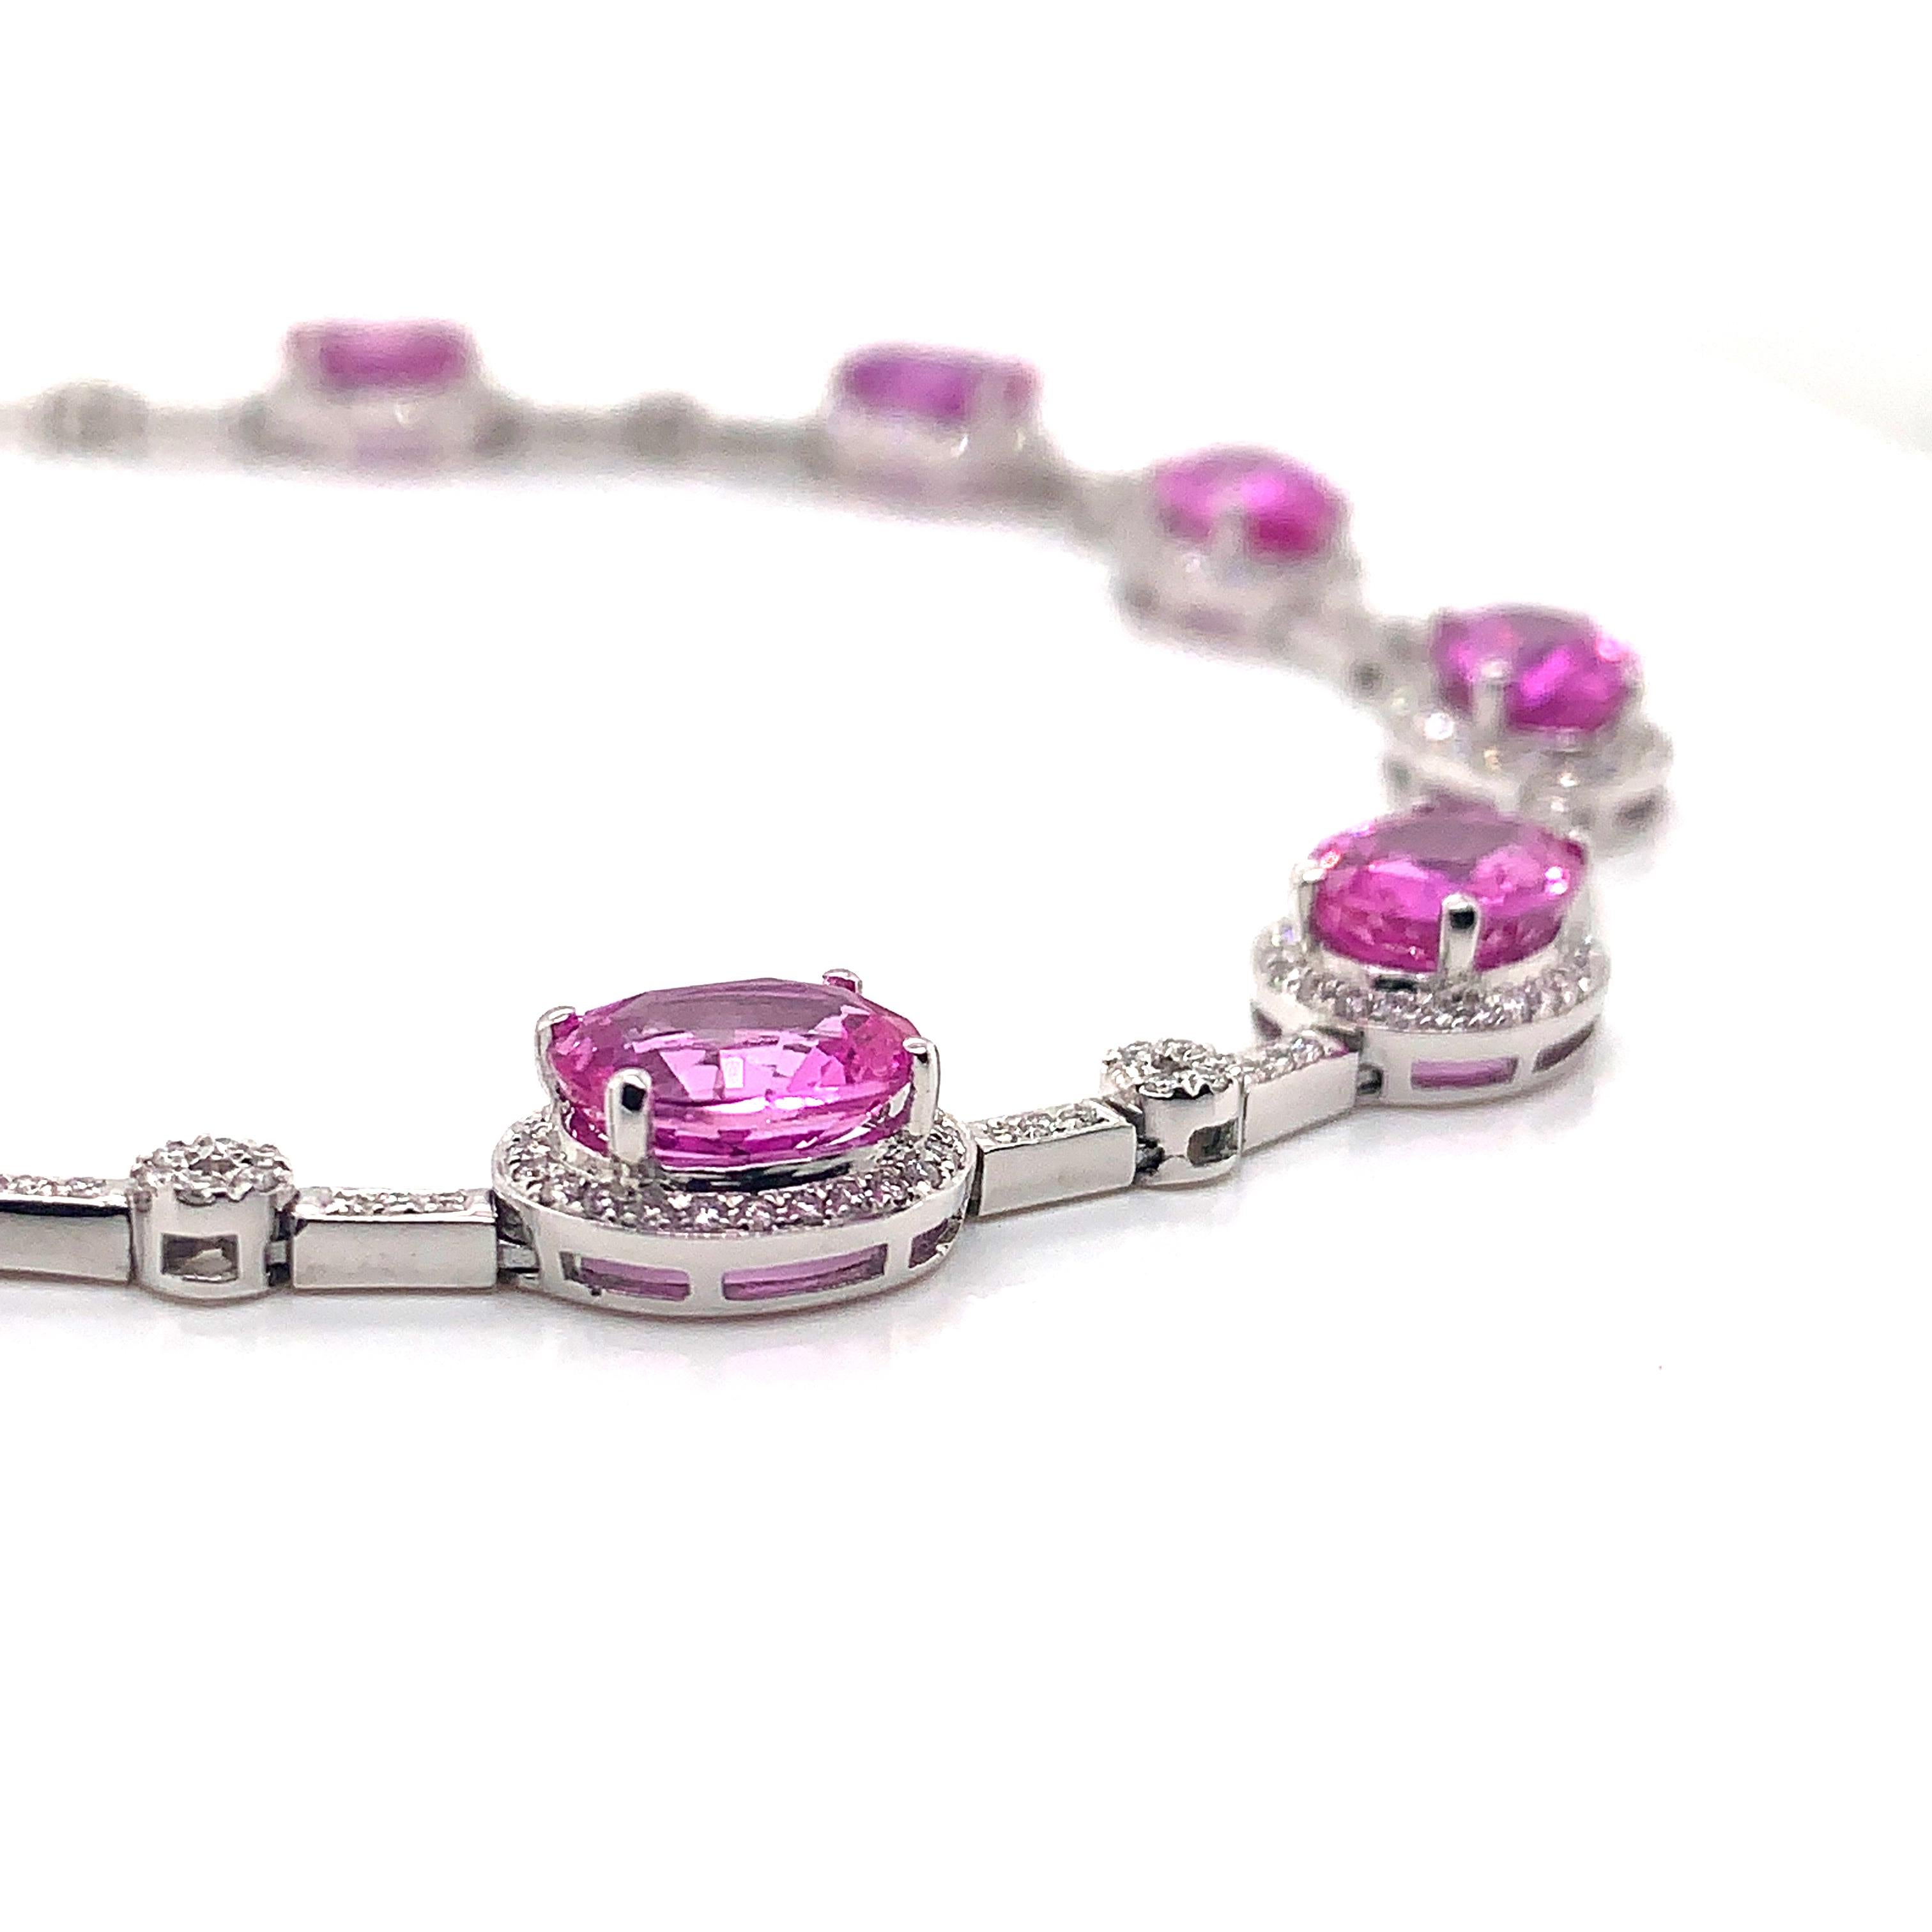 Oval Cut 21.0 Carat Pink Sapphire Necklace in 18 Karat White Gold with Diamonds